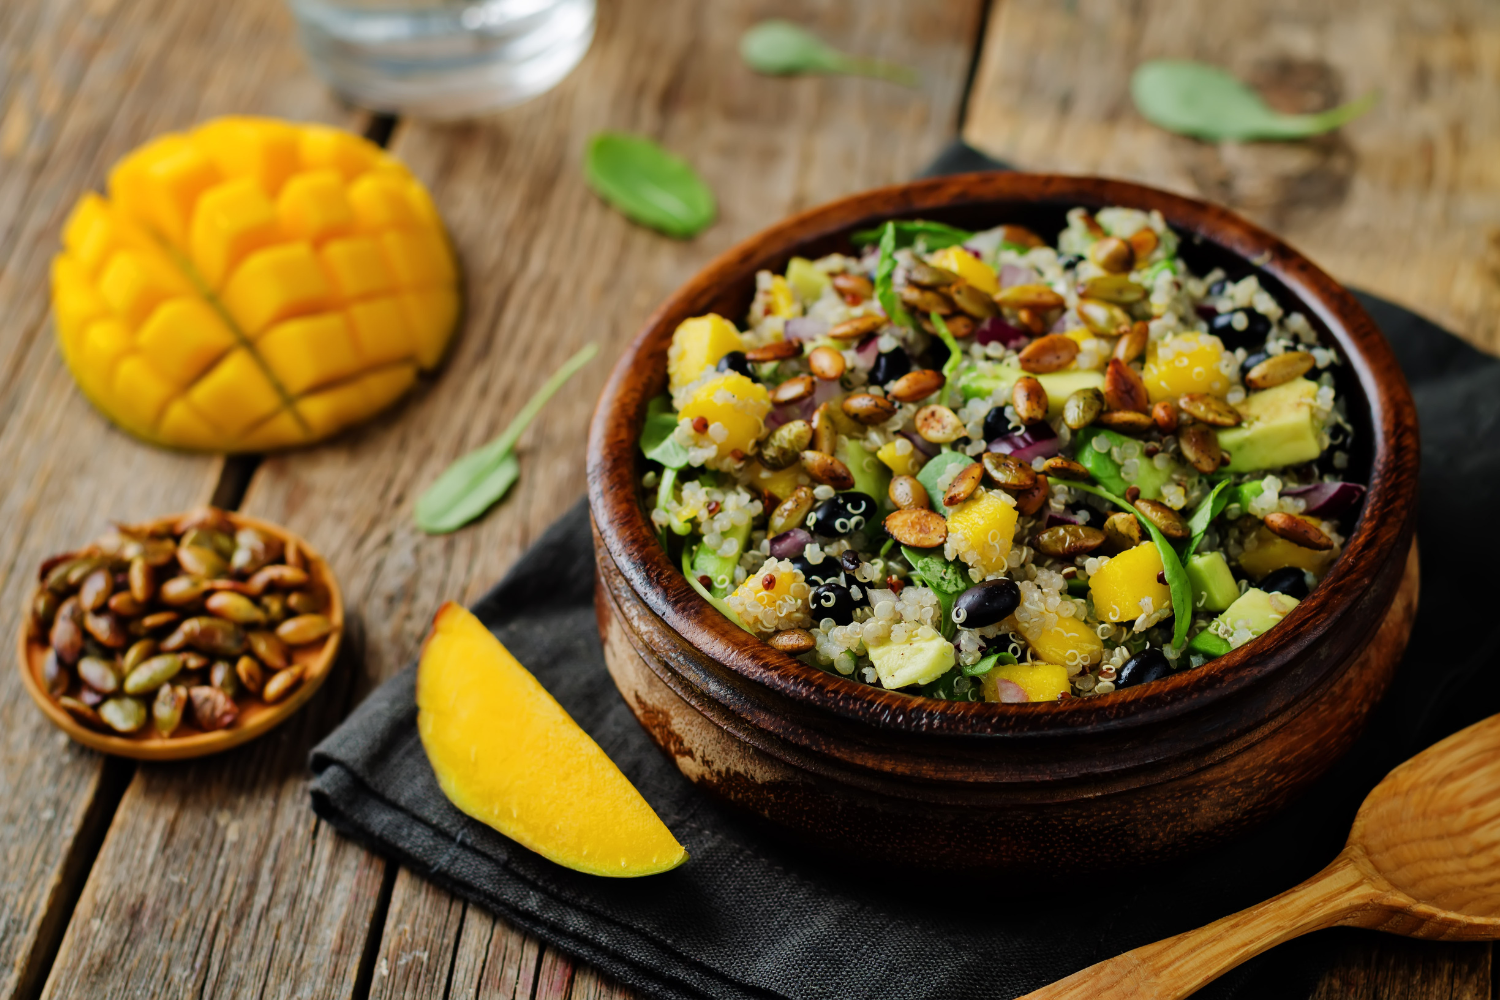 a bowl of mango and black bean salad with a cut mango on the table next to the bowl